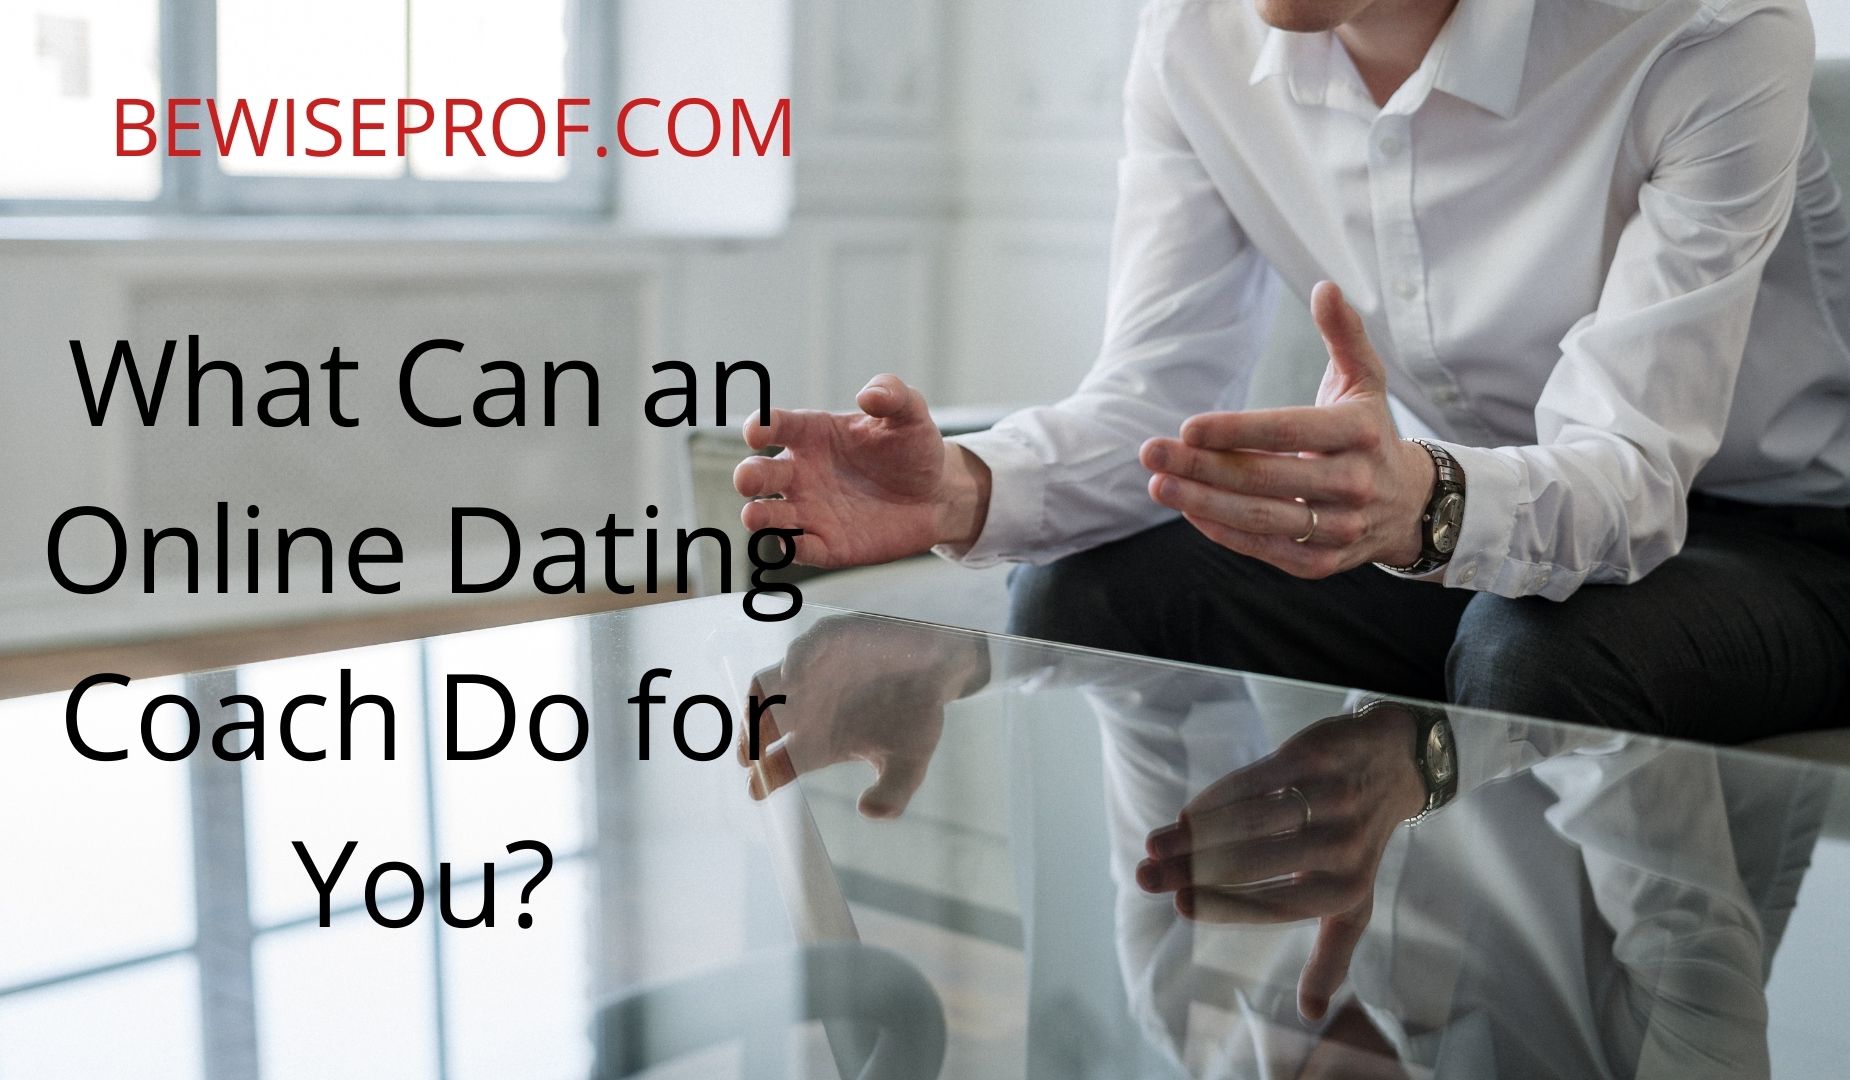 What Can an Online Dating Coach Do for You?